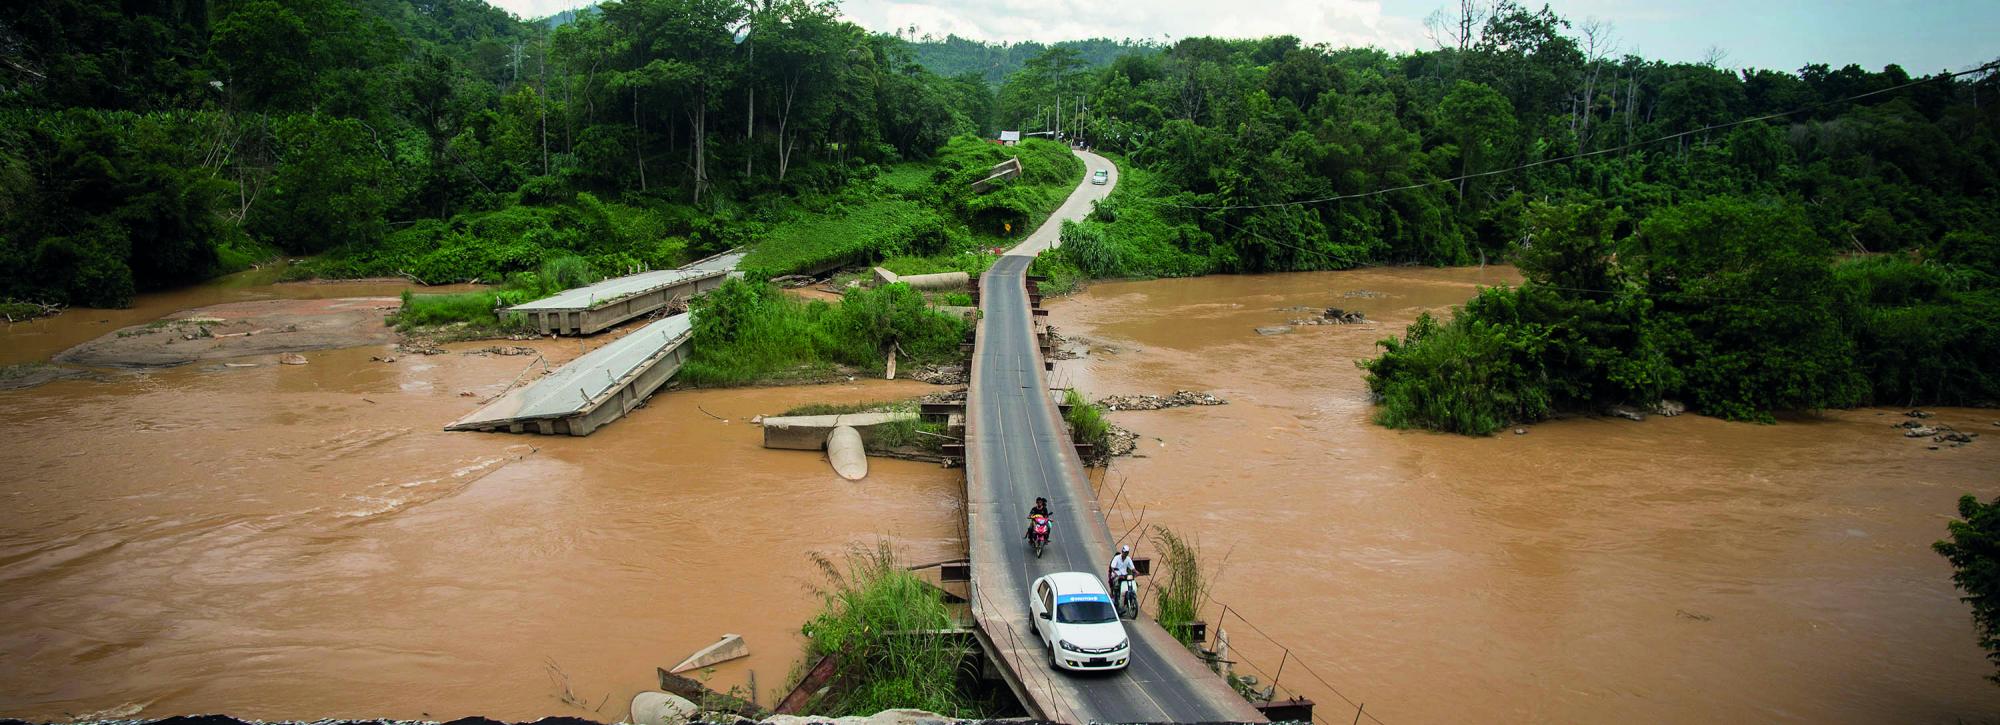 View of a bridge destroyed by flooding in Eastern Malaysia